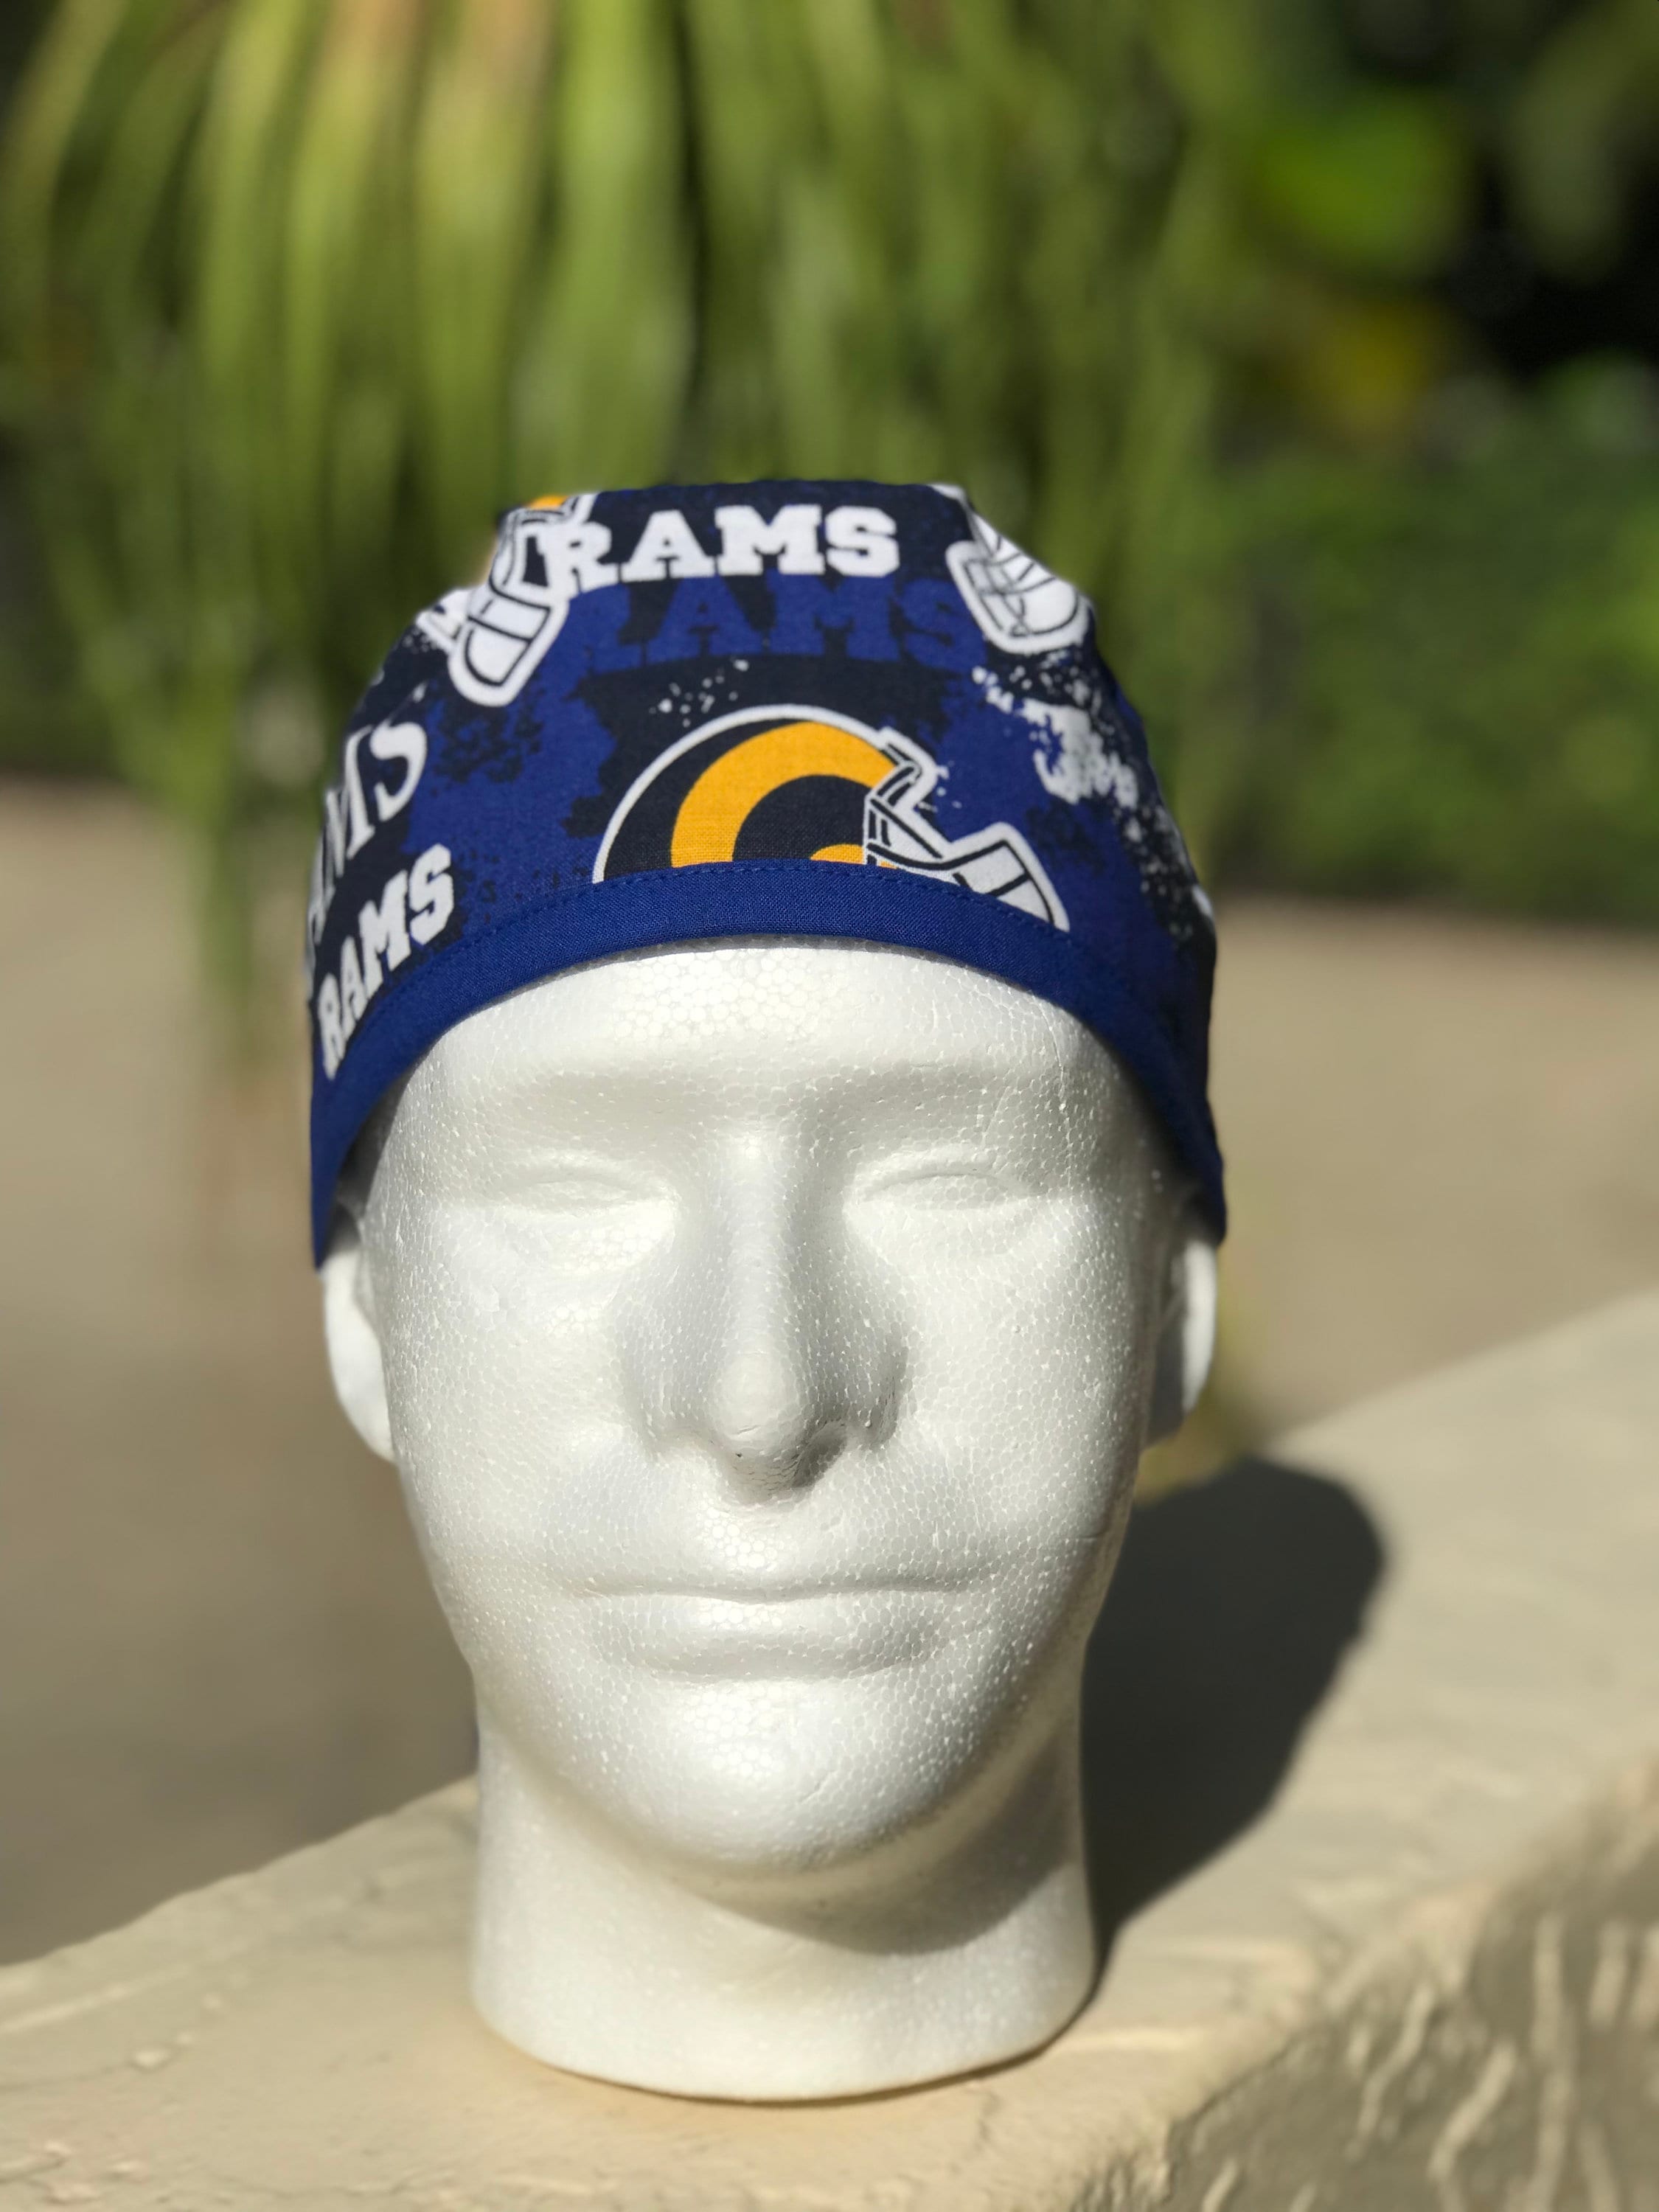 GosiaSurgicalCaps La RAMS-Doctor Surgical Cap w/ Sweat band,anesthesiologist hat,nurse Scrub hat,dentist,hyg,med Lab tech,X-ray tech,baker,chef hat,bandanna !